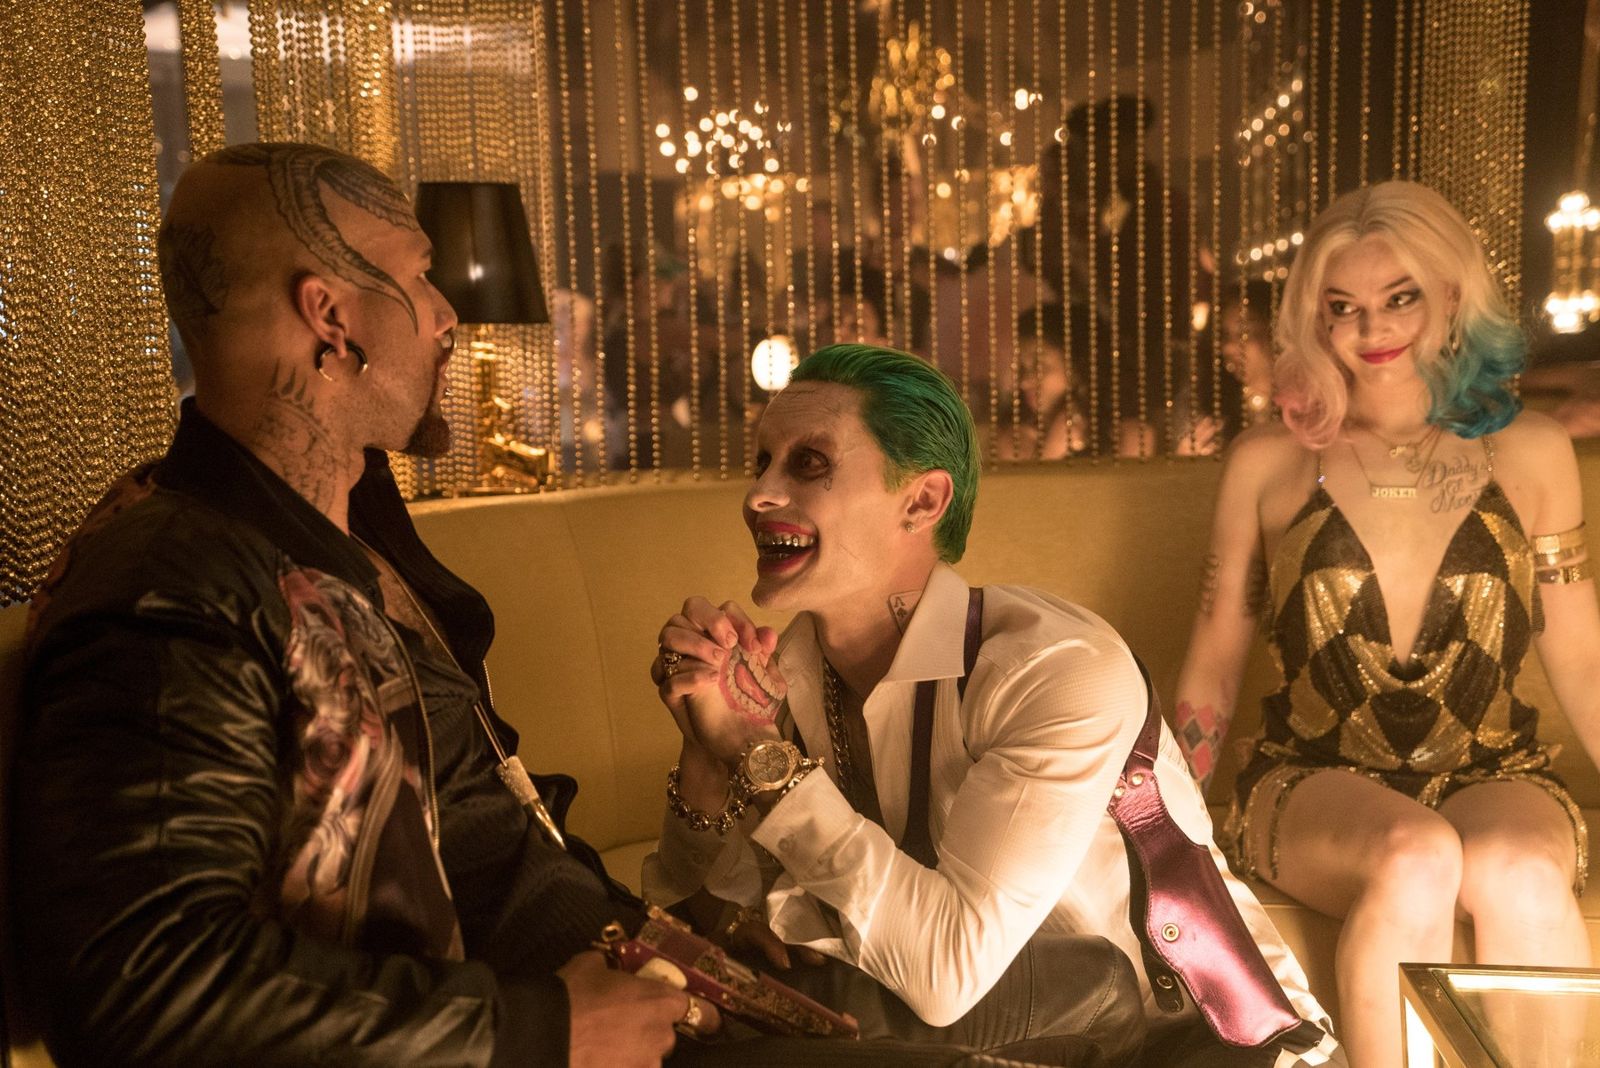 Jared Leto Will Be Reprising The Role Of Joker For One Last Time!